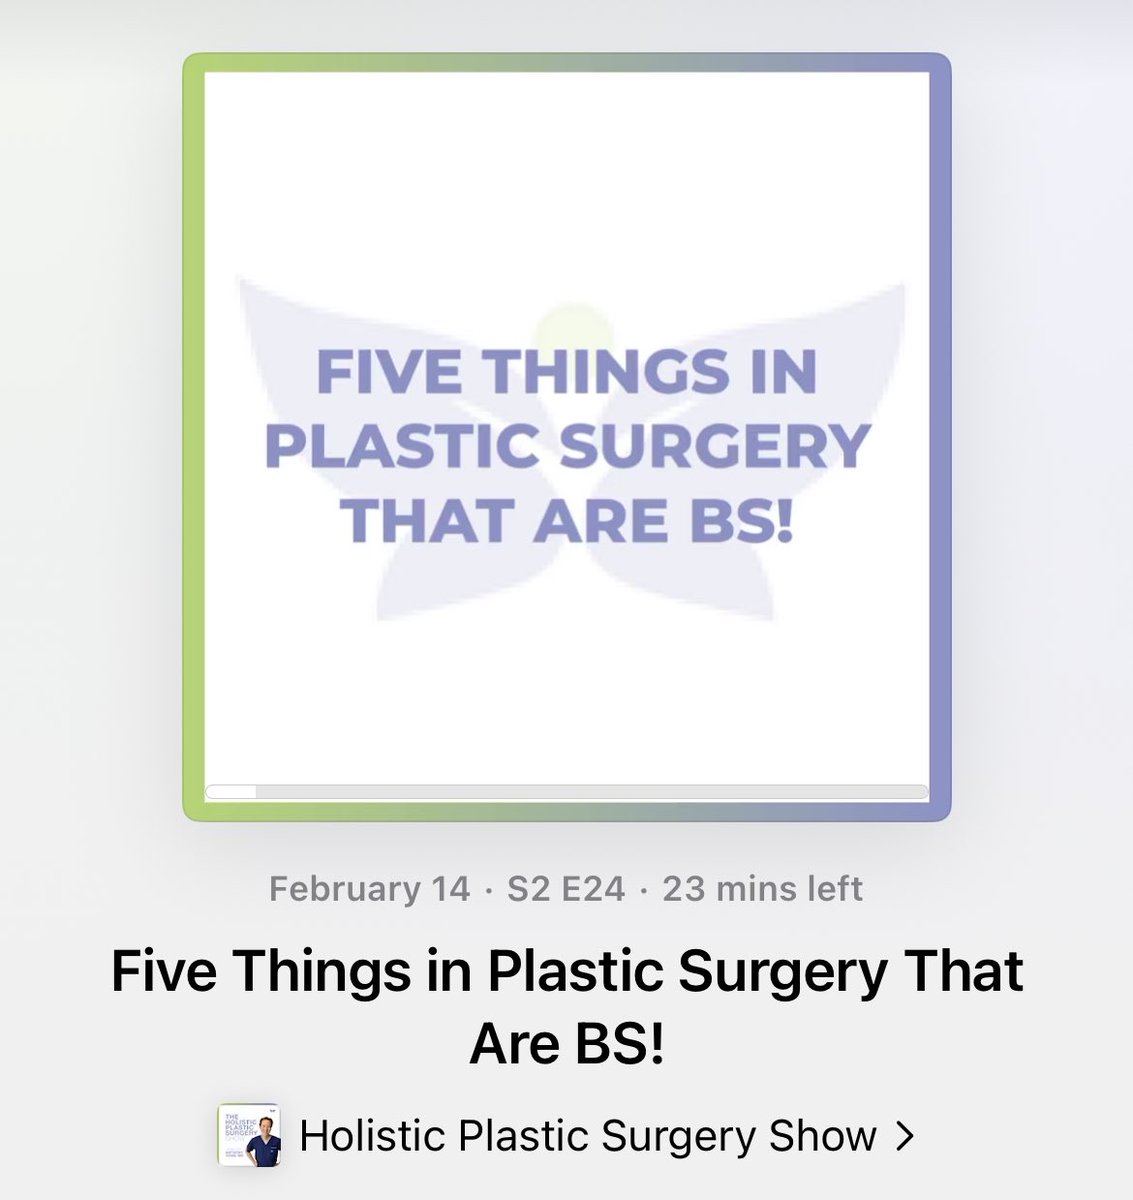 My latest podcast on BS in plastic surgery! podcasts.apple.com/us/podcast/hol…